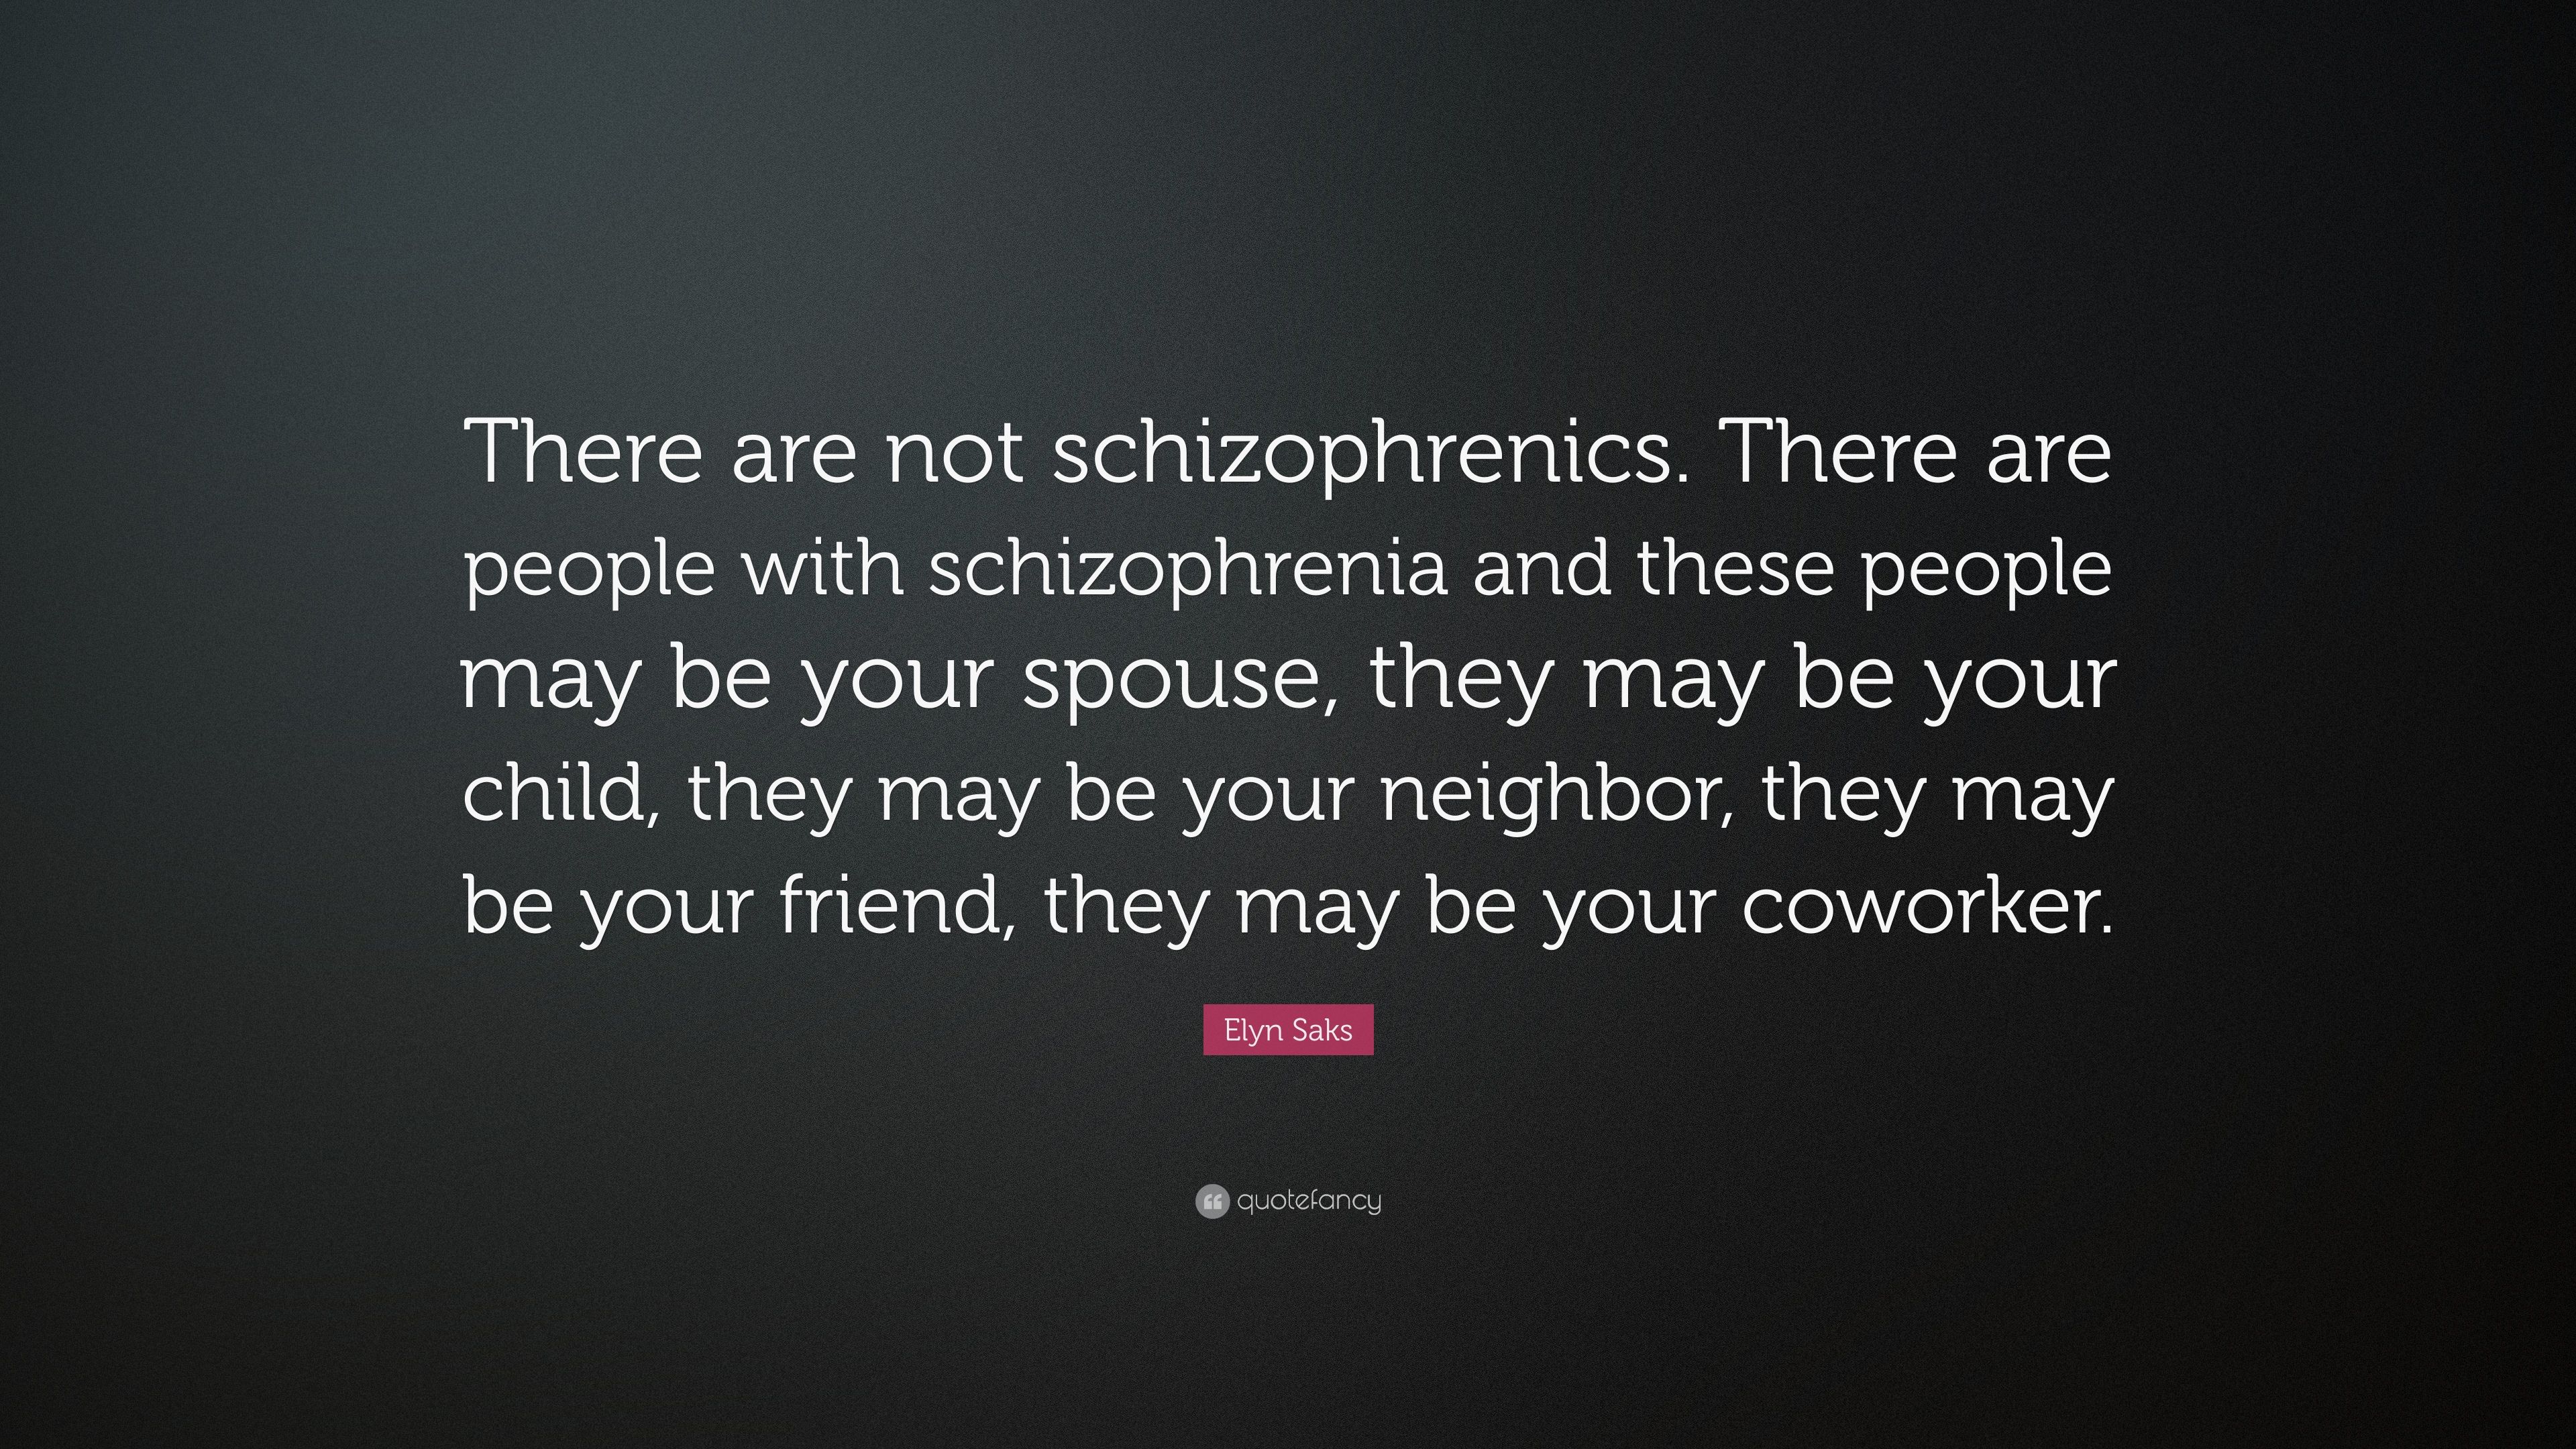 Elyn Saks Quote: “There are not schizophrenics. There are people with schizophrenia and these people may be your spouse, they may be your .” (7 wallpaper)